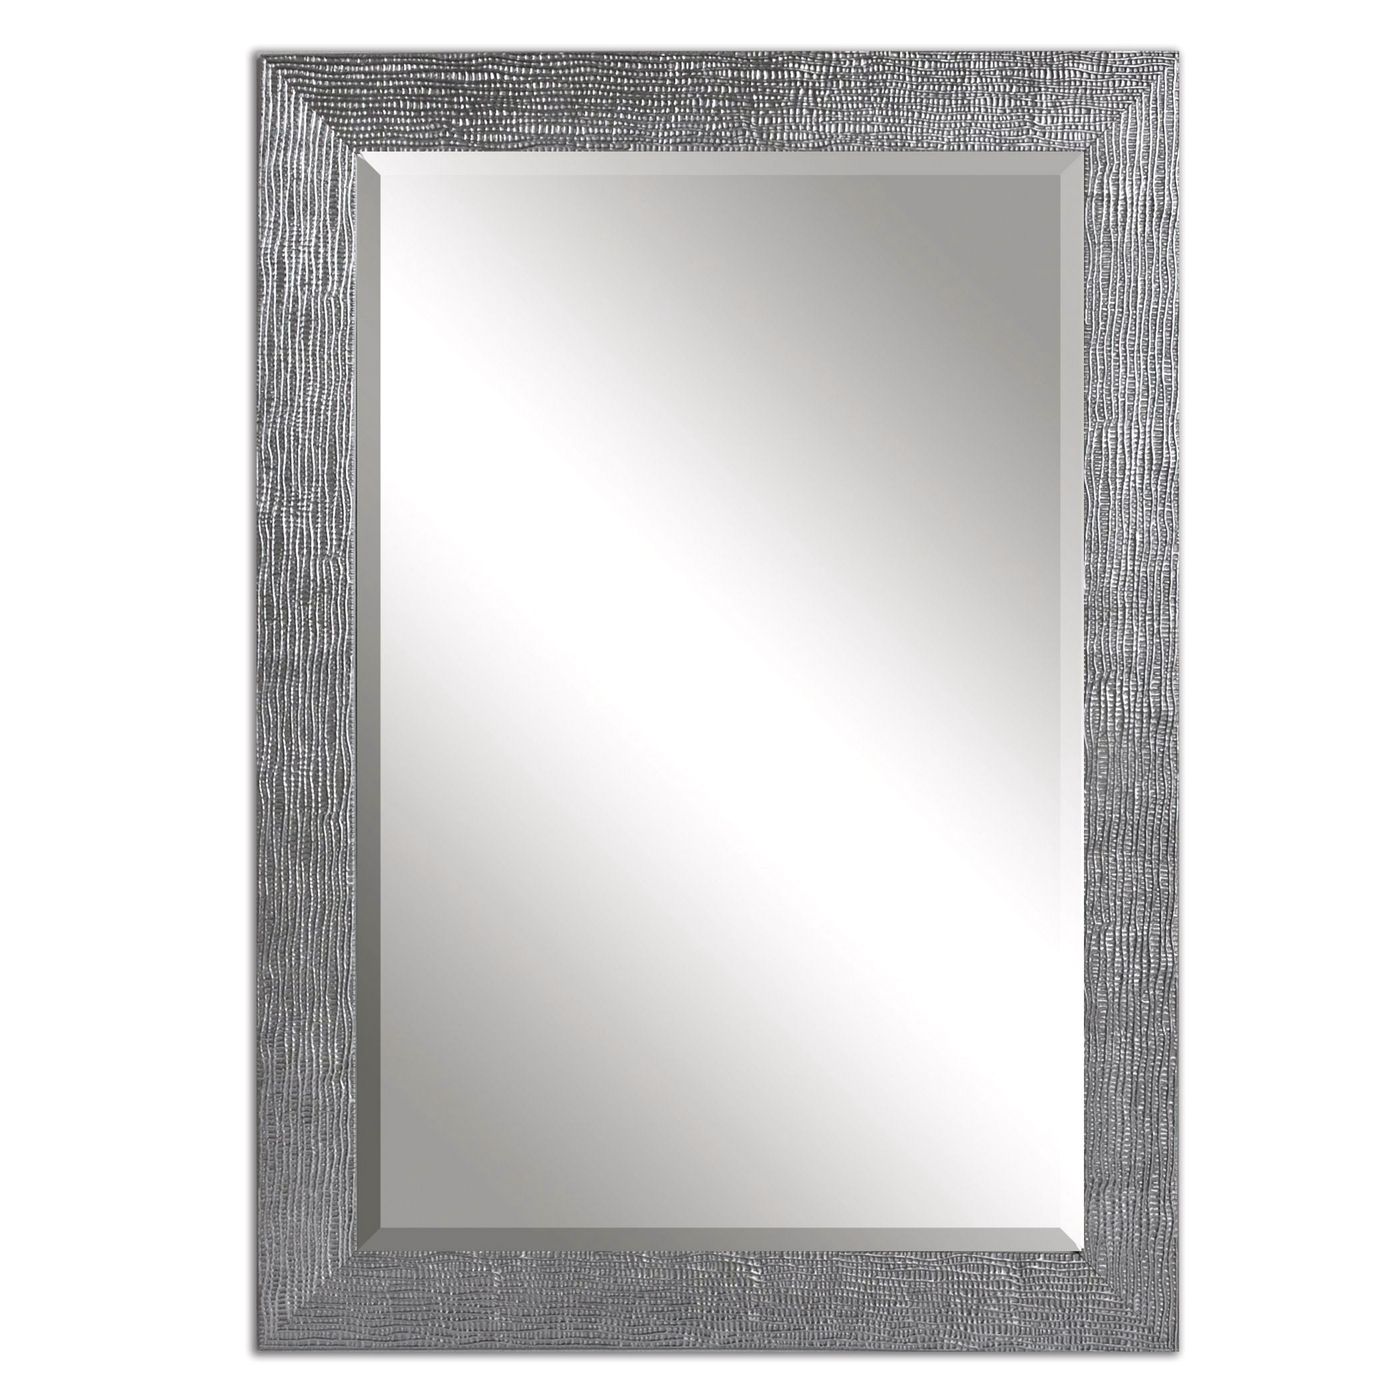 Tarek Contemporary Silver Beaded Frame Mirror 14604 For Silver Beaded Square Wall Mirrors (View 5 of 15)